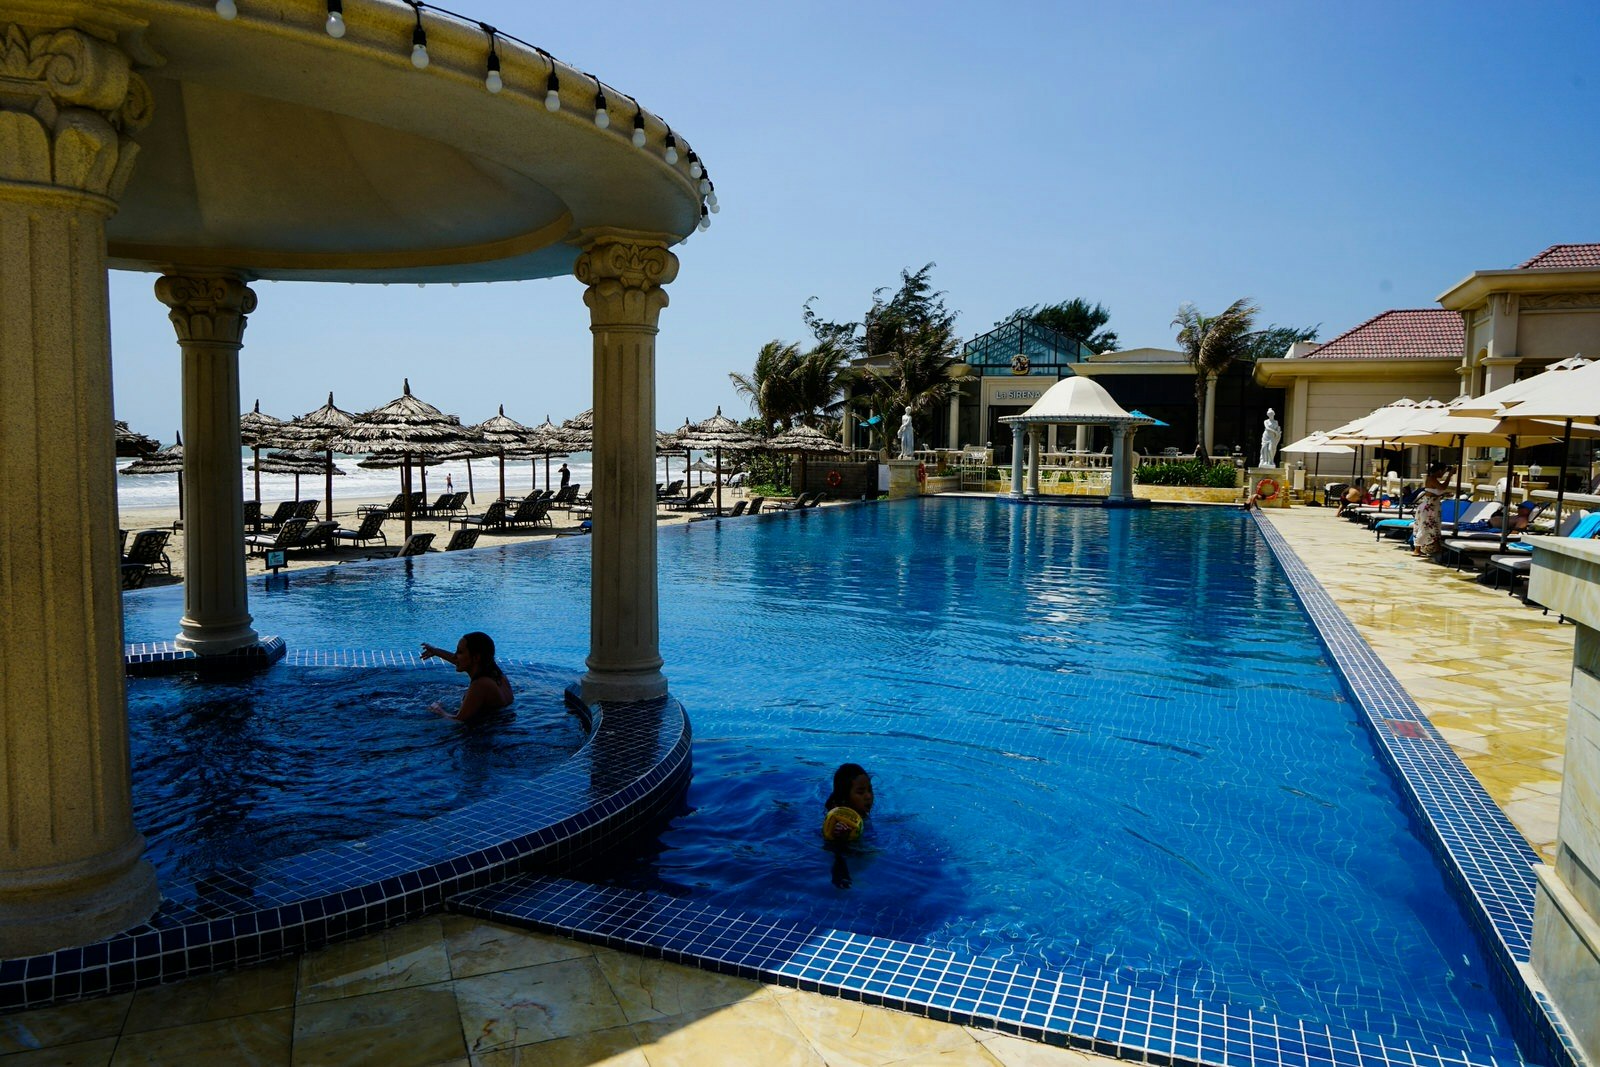 The pool at Imperial Hotel, Vung Tau; best day trips from Ho Chi Minh City 